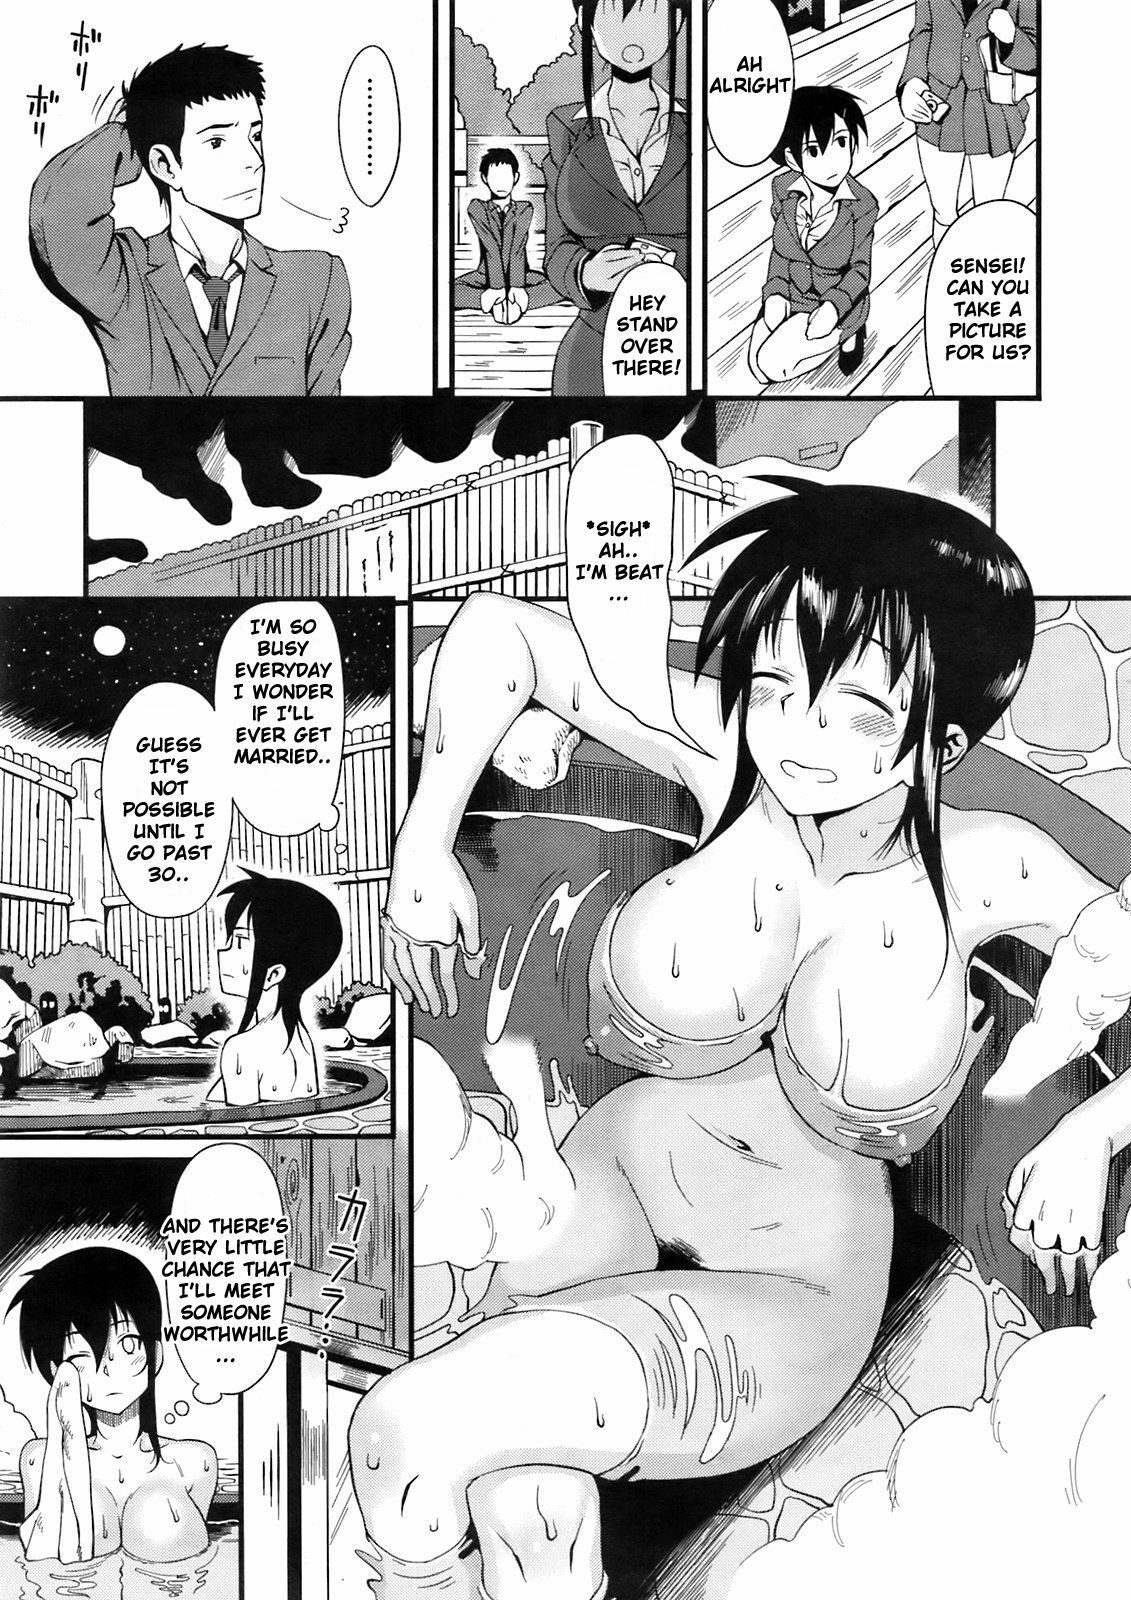 [Lunch] Onsen Satisfaction (Comic Megastore 2009-05) [English] {Sandwhale} page 3 full